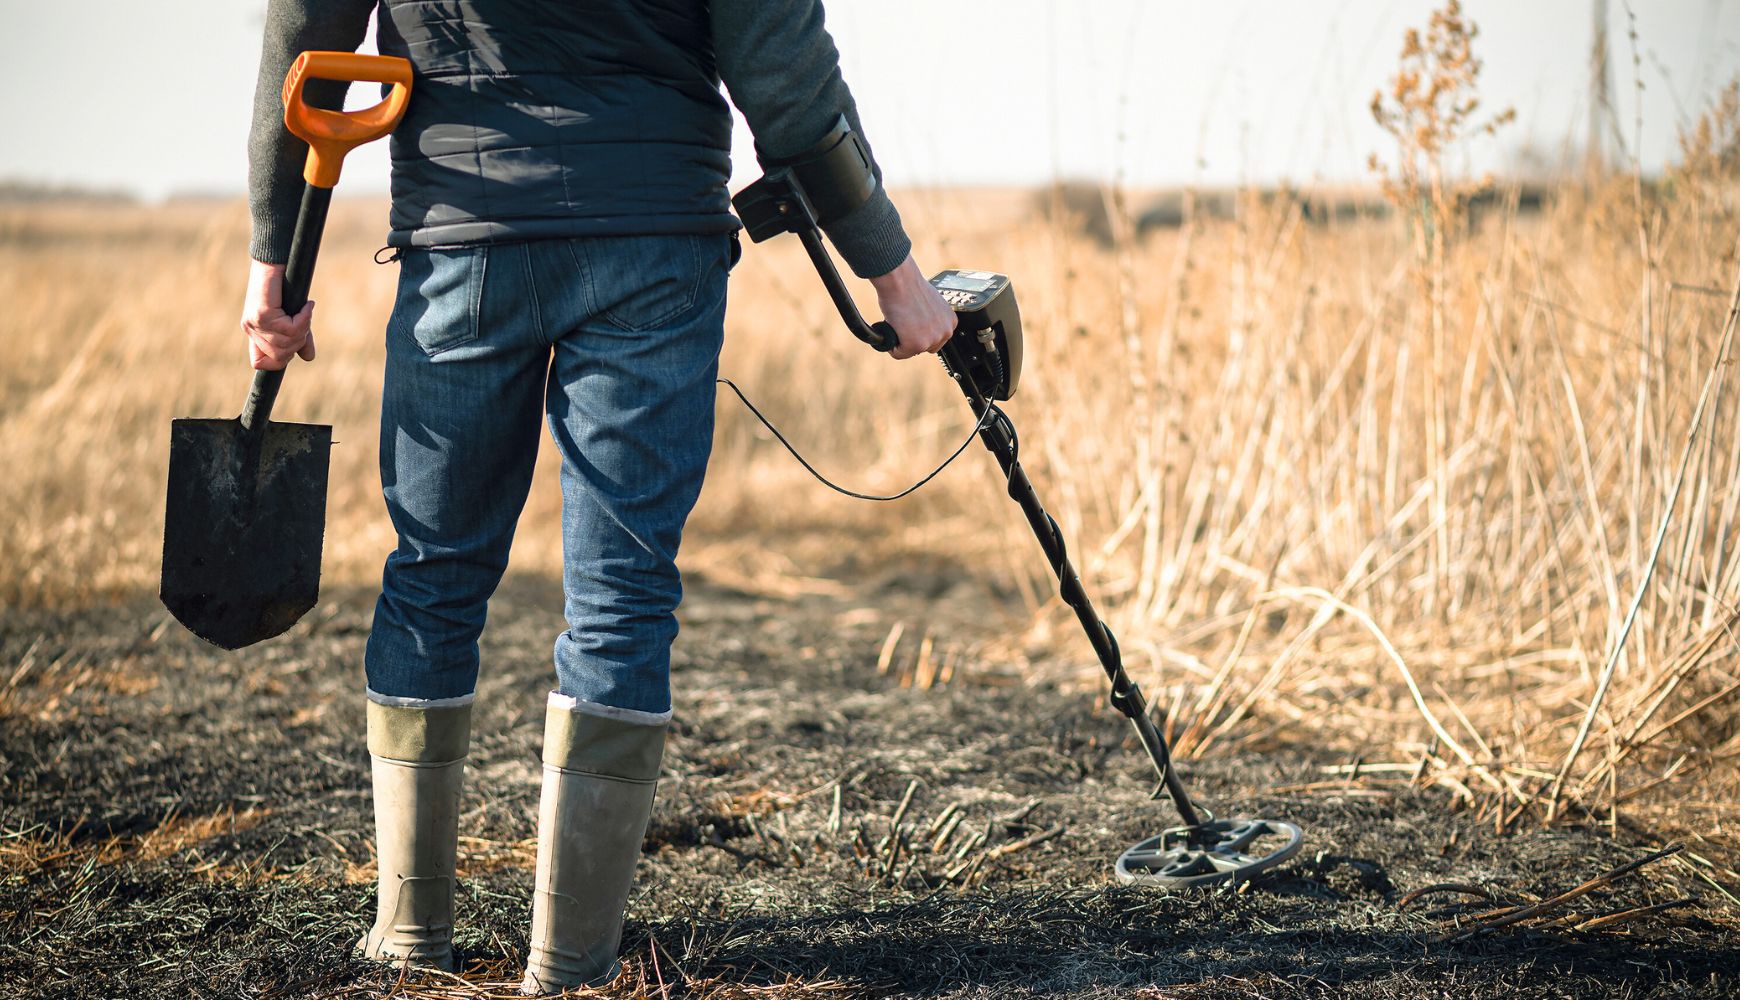 Essential Equipment Needed To Get Started Metal Detecting